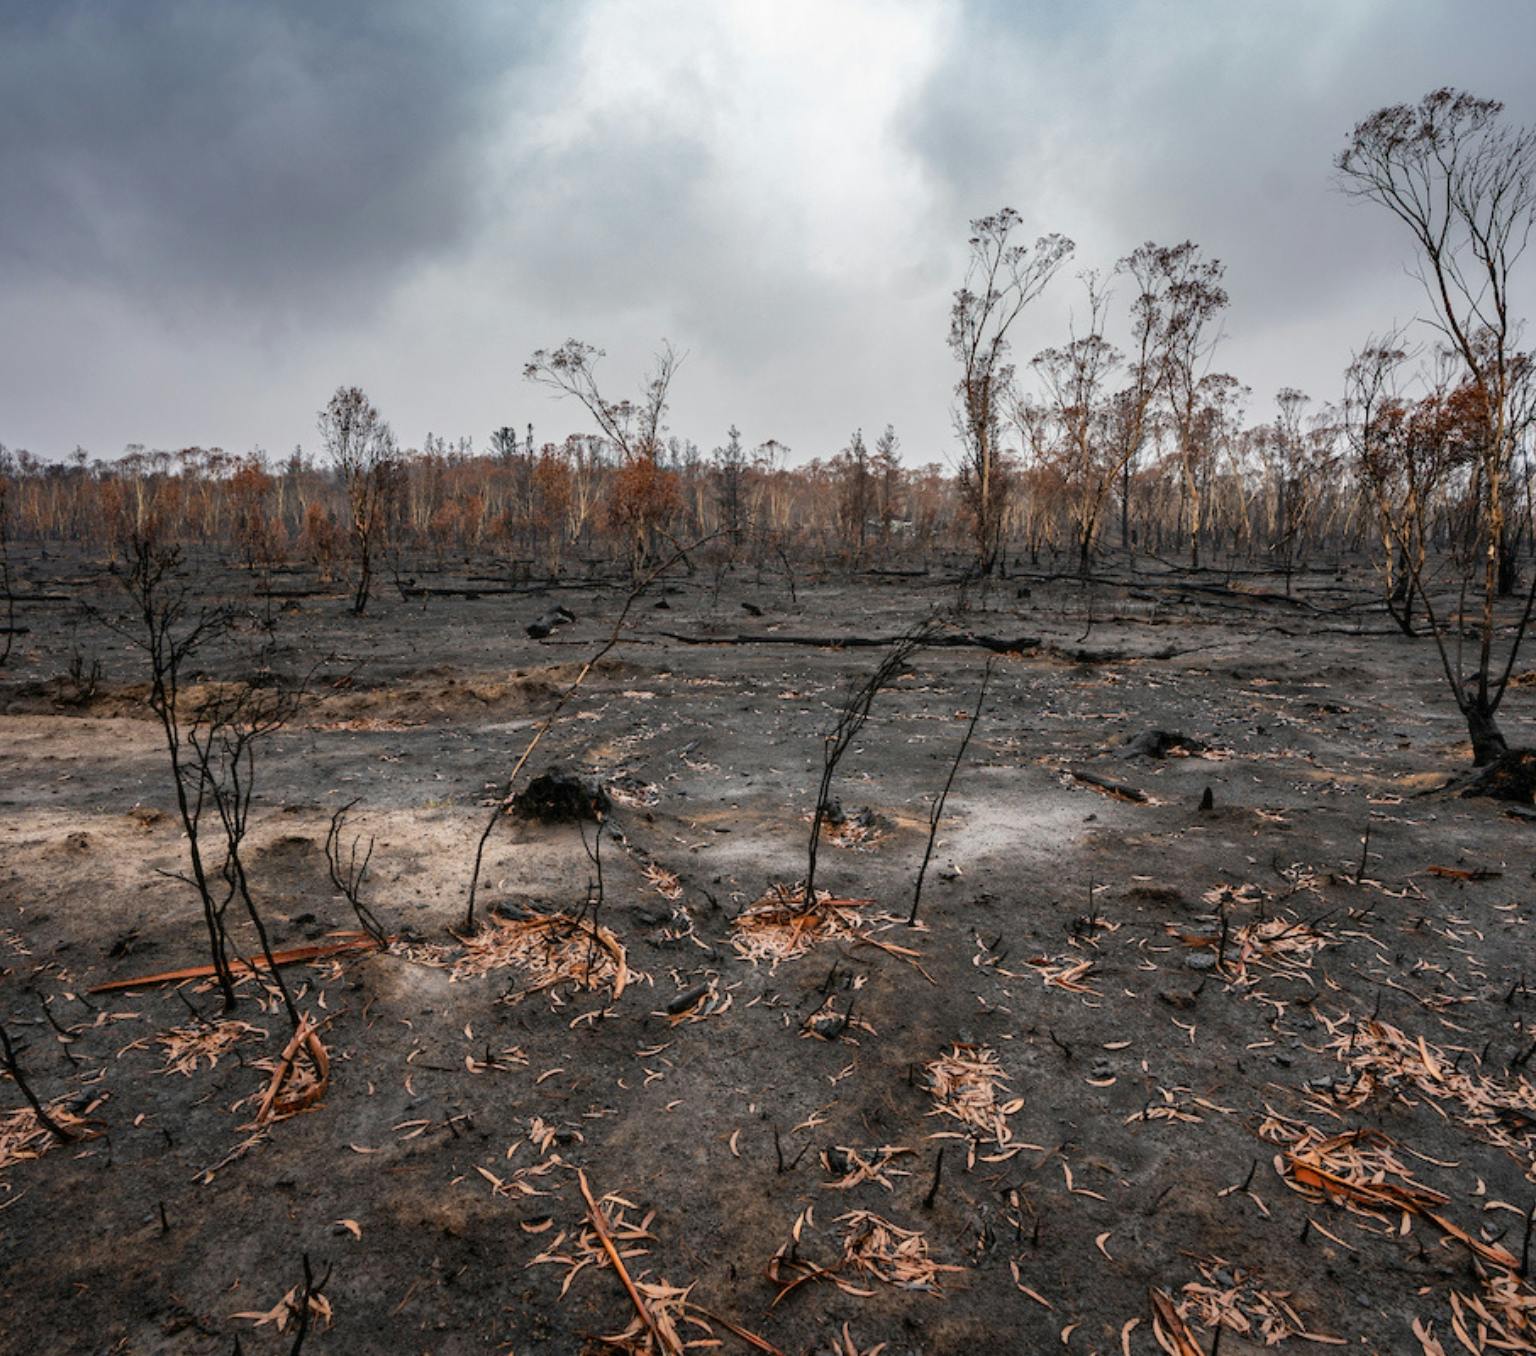 Burnt trees and scrub are all that remain in Tallaganda State Forest in NSW following the devastating Black Summer bushfires.